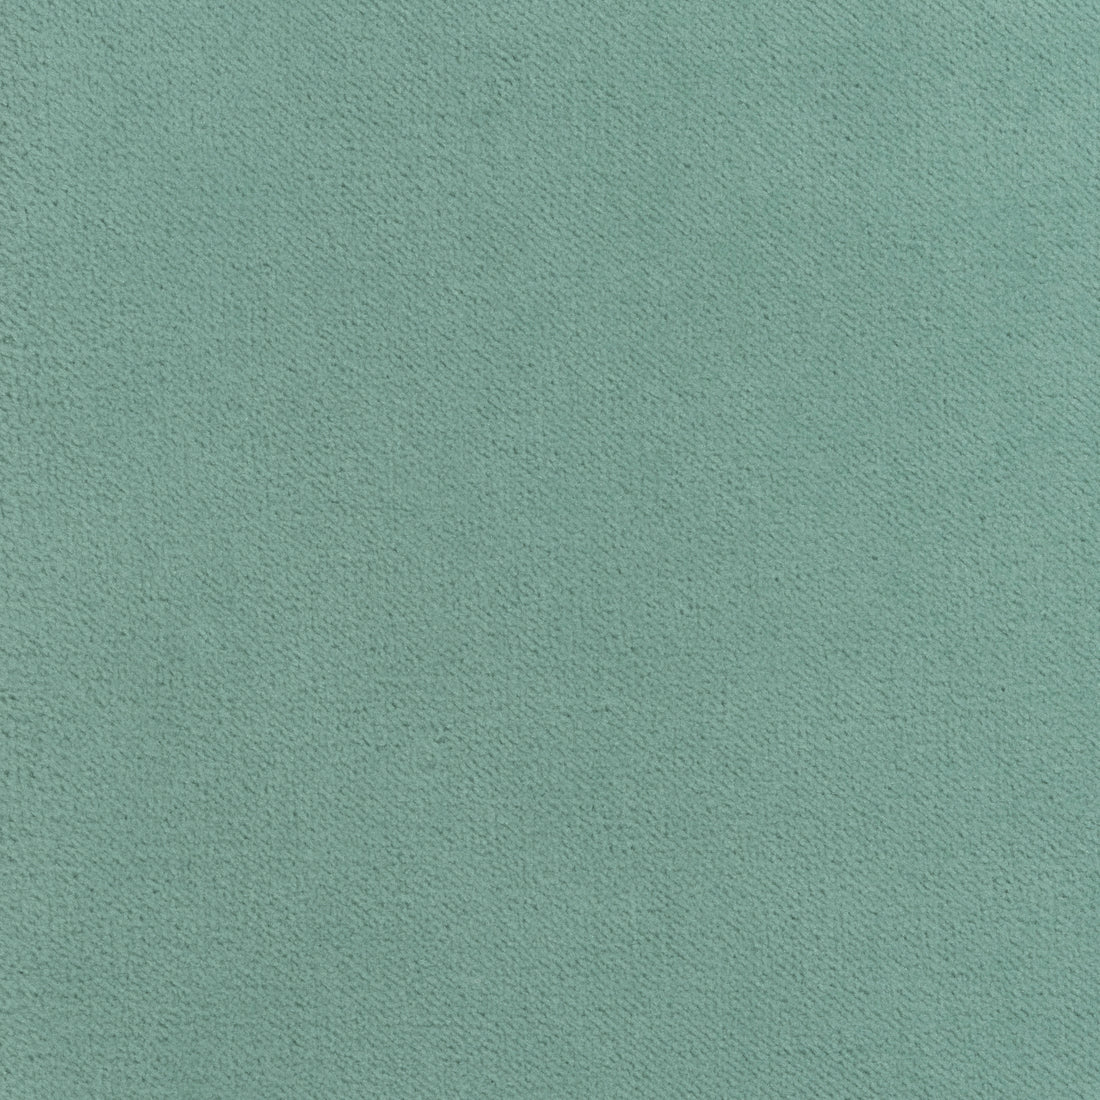 Club Velvet fabric in seafoam color - pattern number W7247 - by Thibaut in the Club Velvet collection